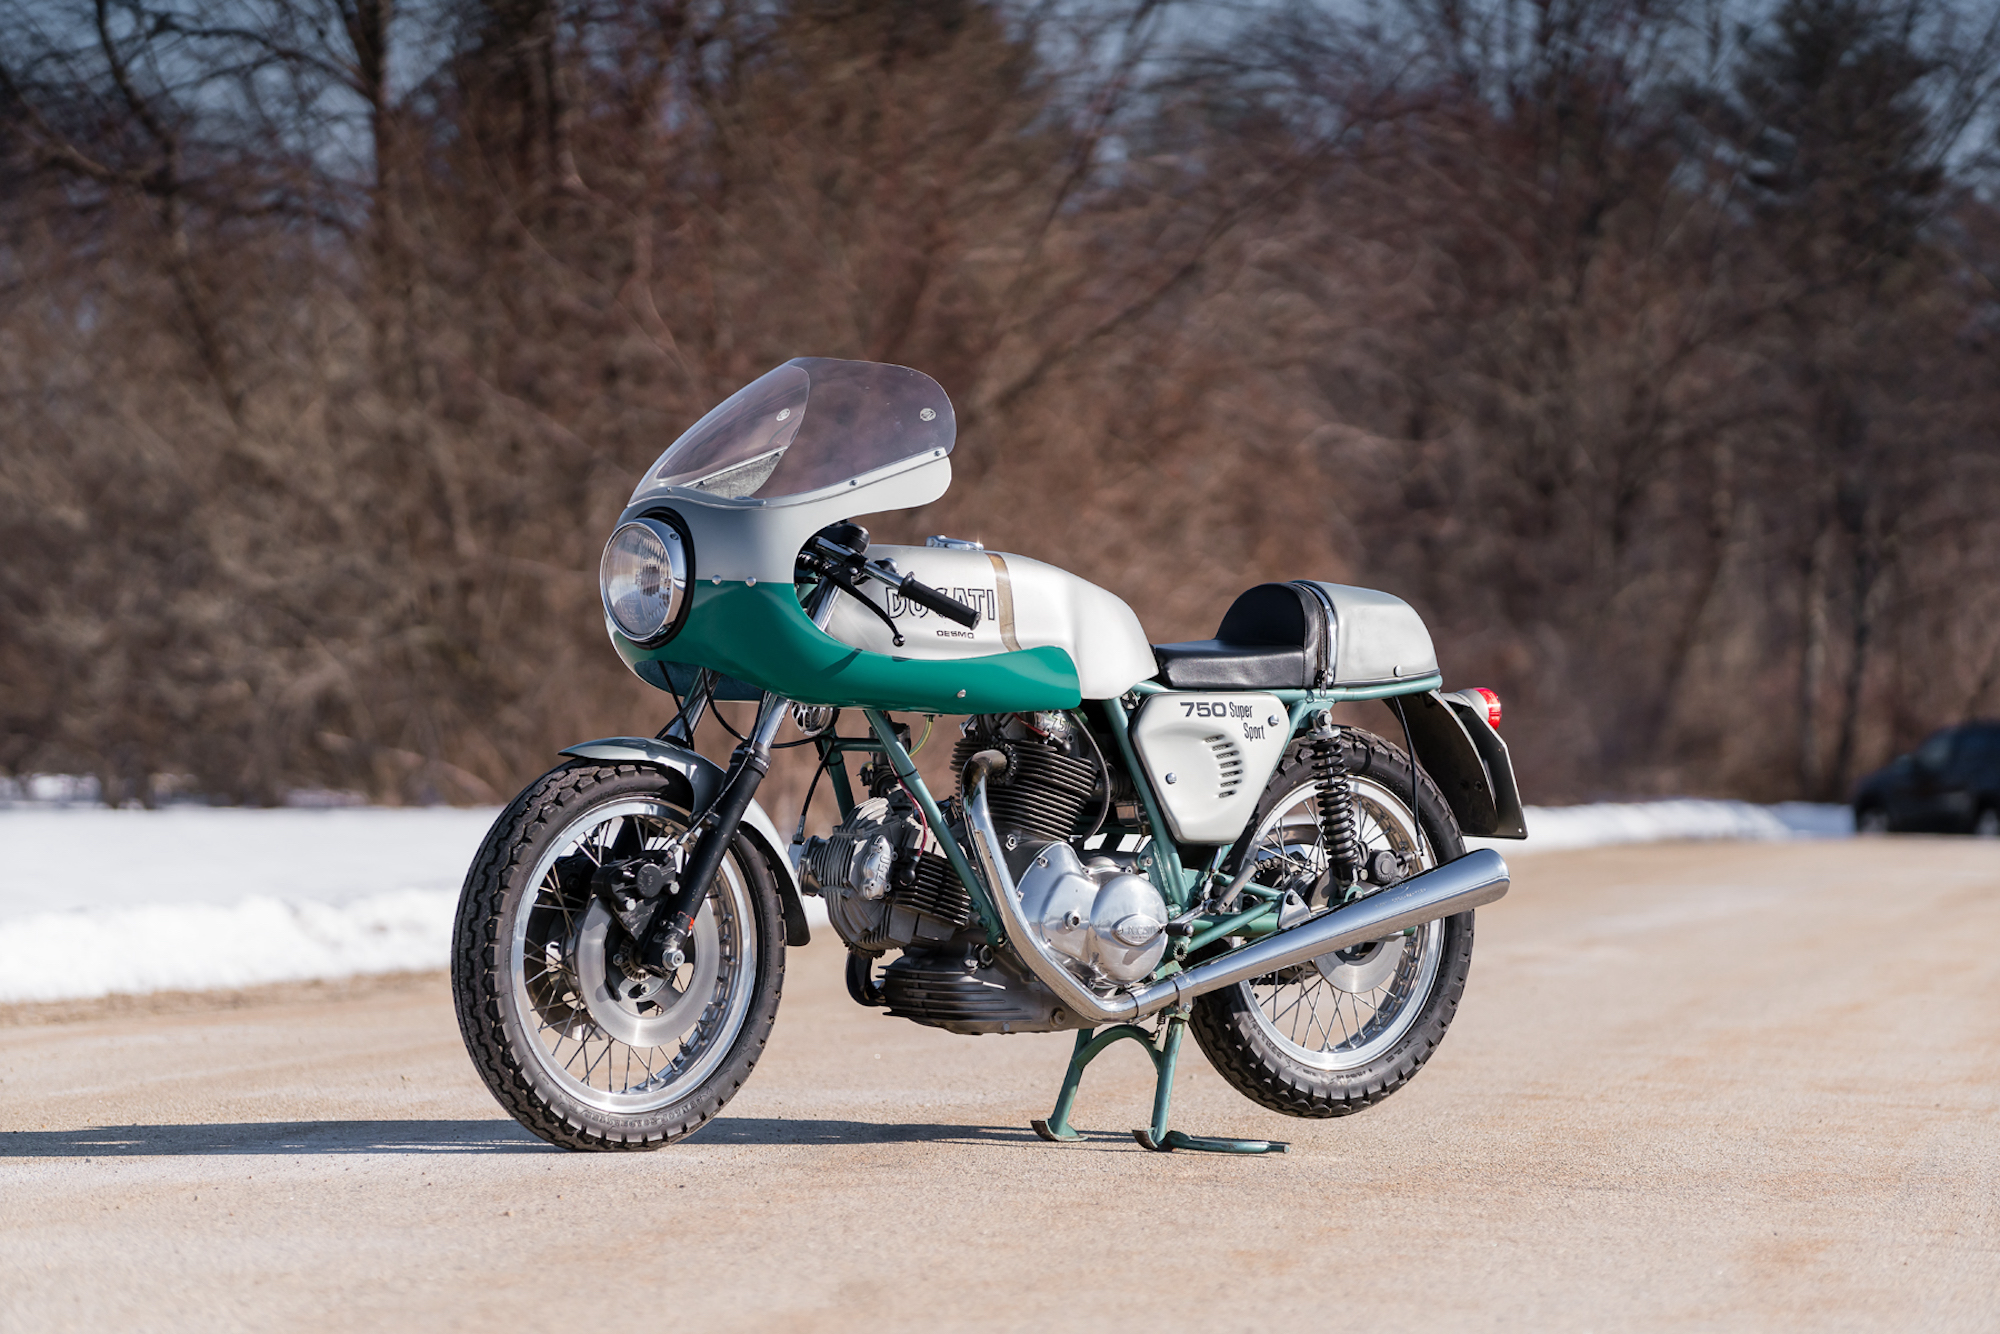 A 1974 Ducati 750SS - media used as an example. THIS IS NOT THE BONHAMS AUCTION MACHINE. Media sourced from the Hagerty Insider.